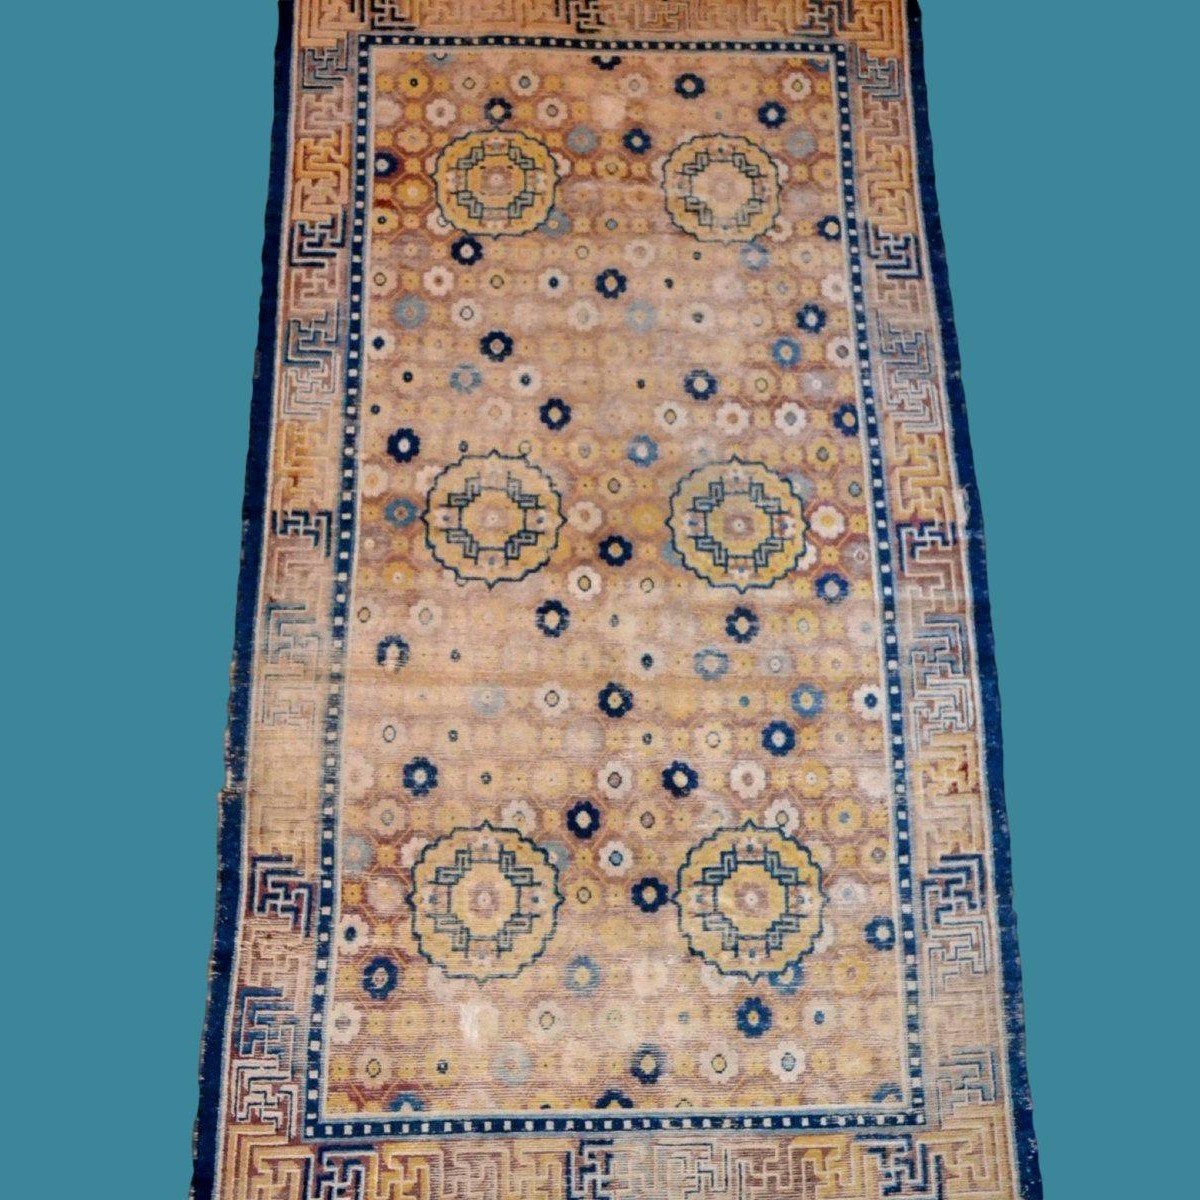 Old Kashgar, 162 X 302 Cm, Hand-knotted Wool In Eastern Turkestan, Late 18th - Early 19th Century